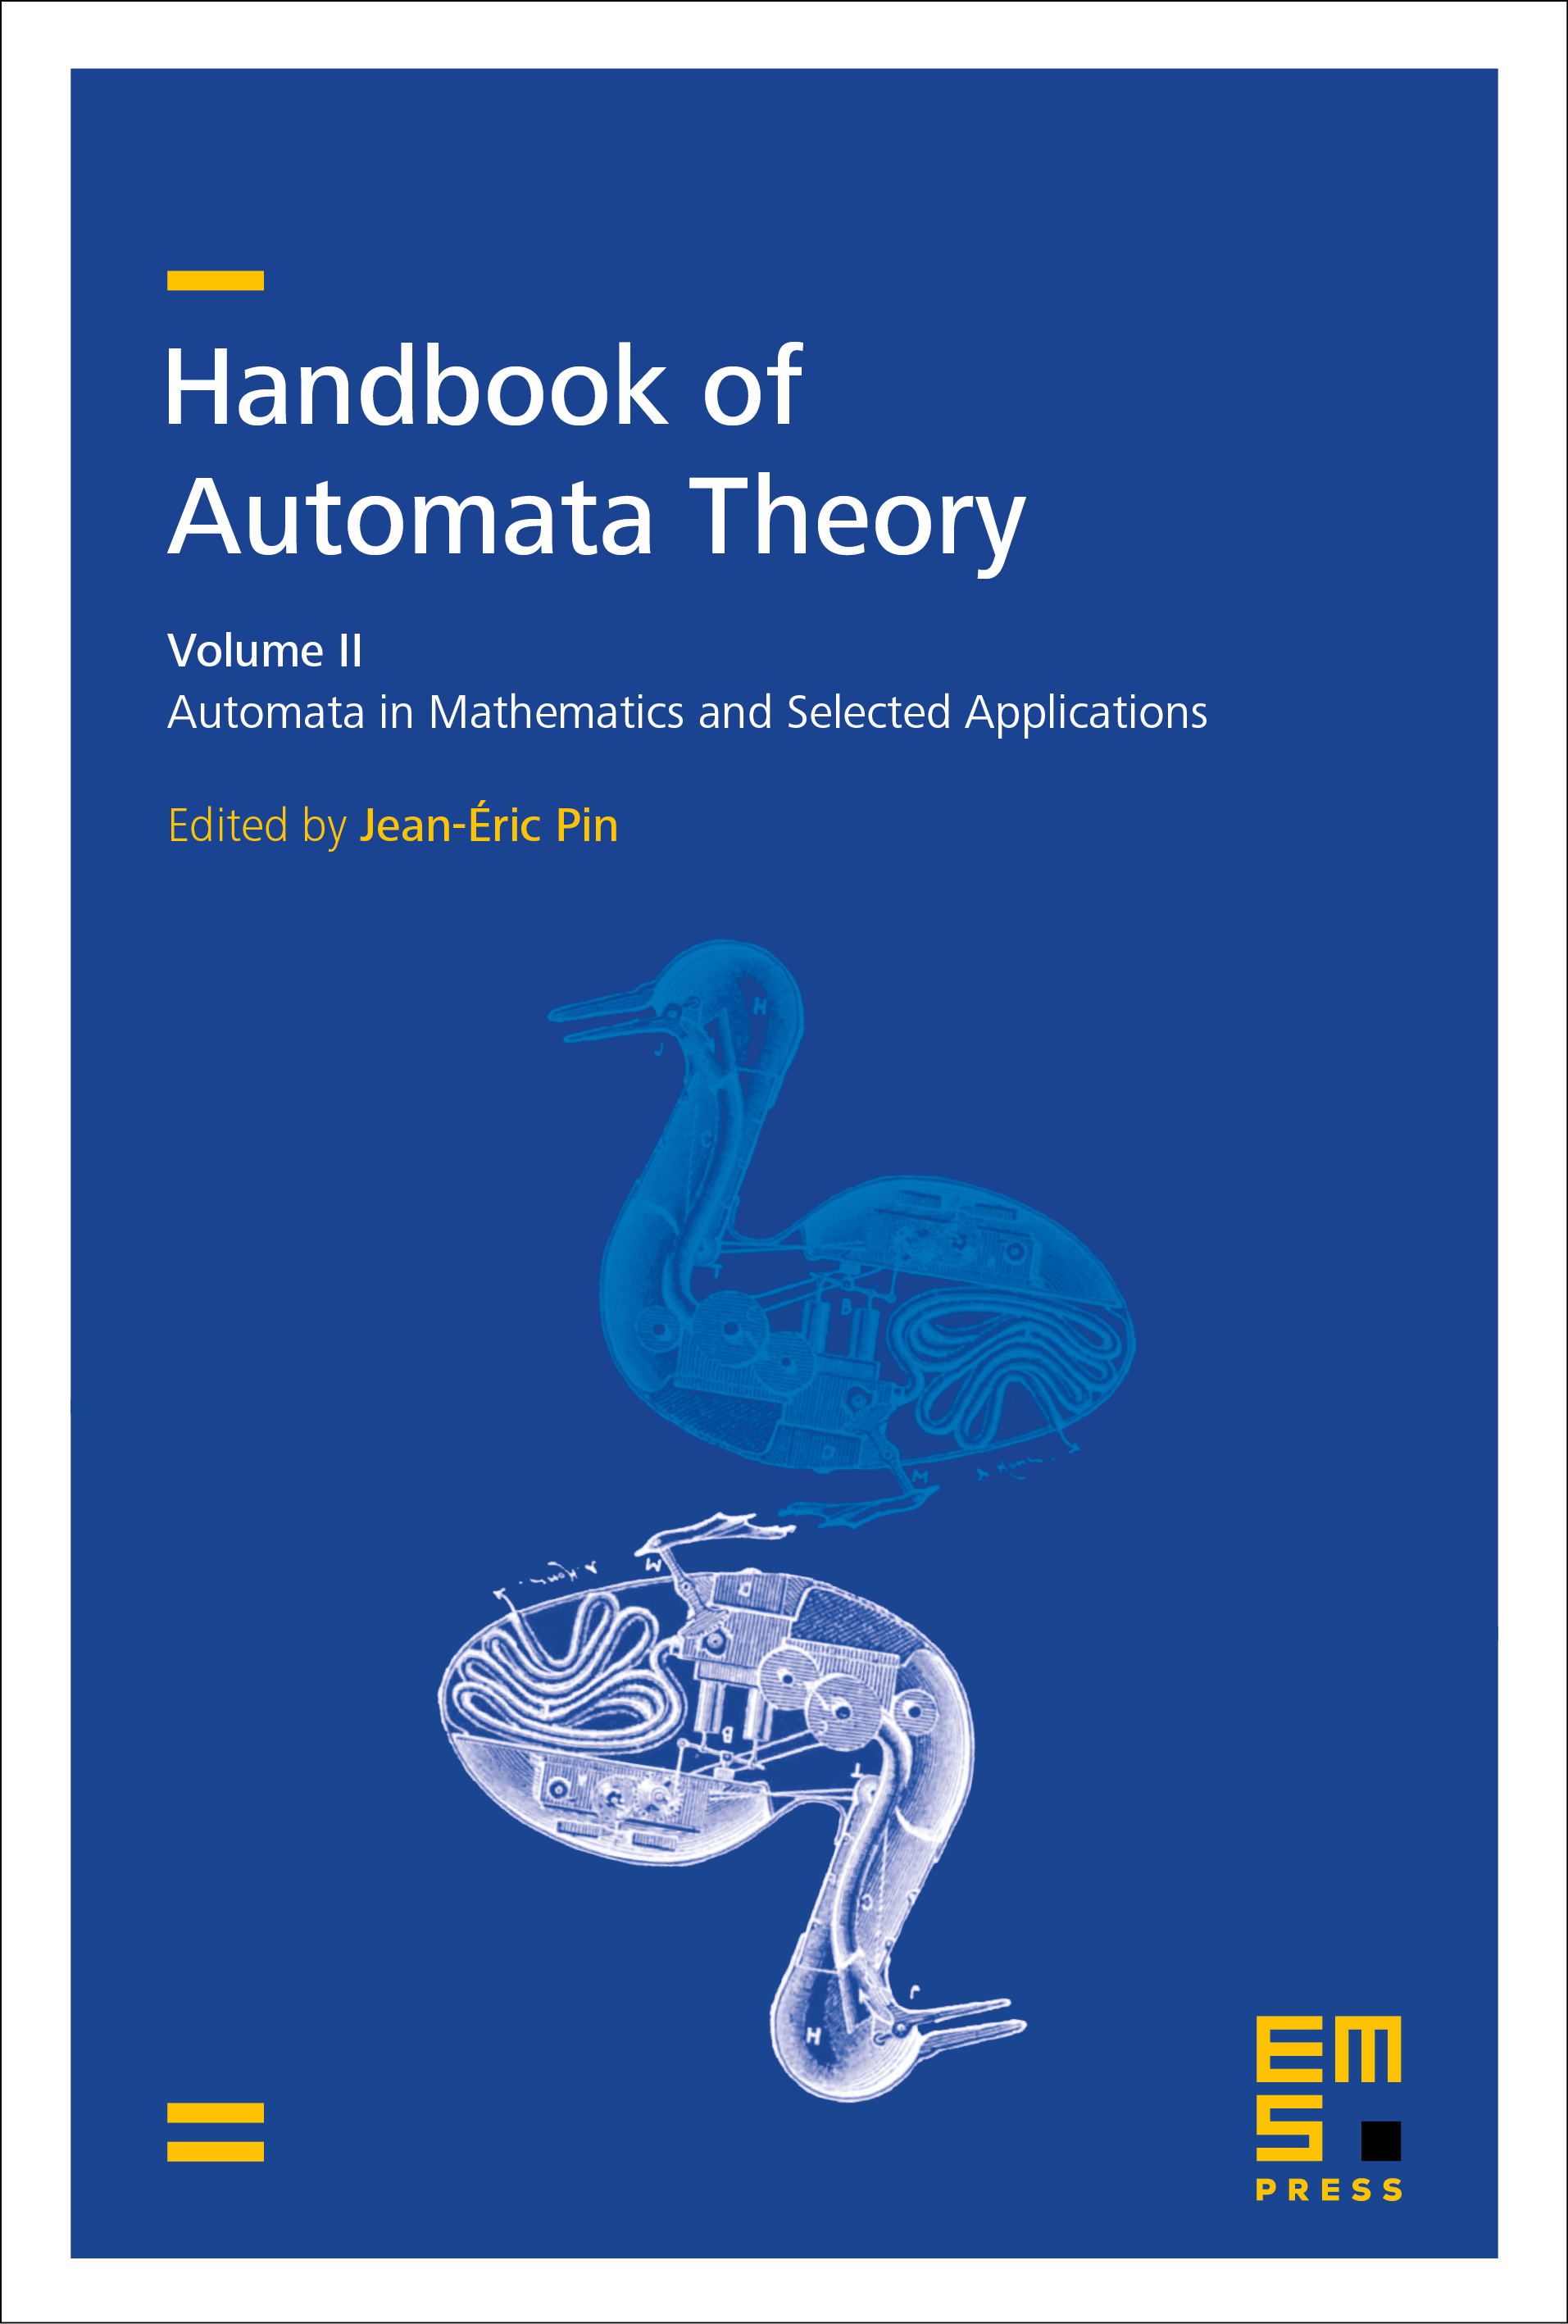 Higher-order recursion schemes and their automata models cover